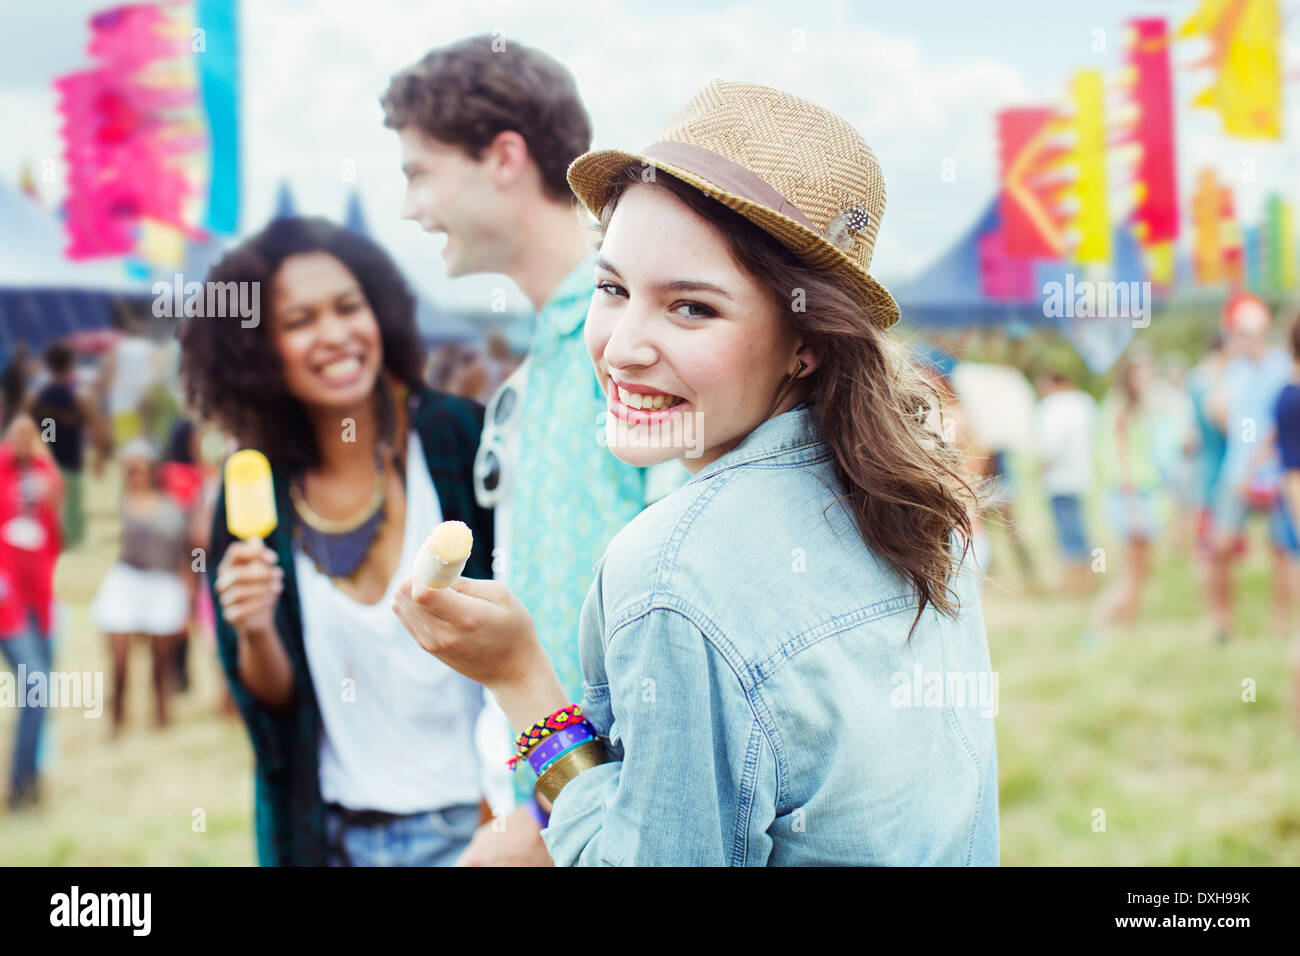 Portrait of woman eating flavored ice with friends at music festival Stock Photo